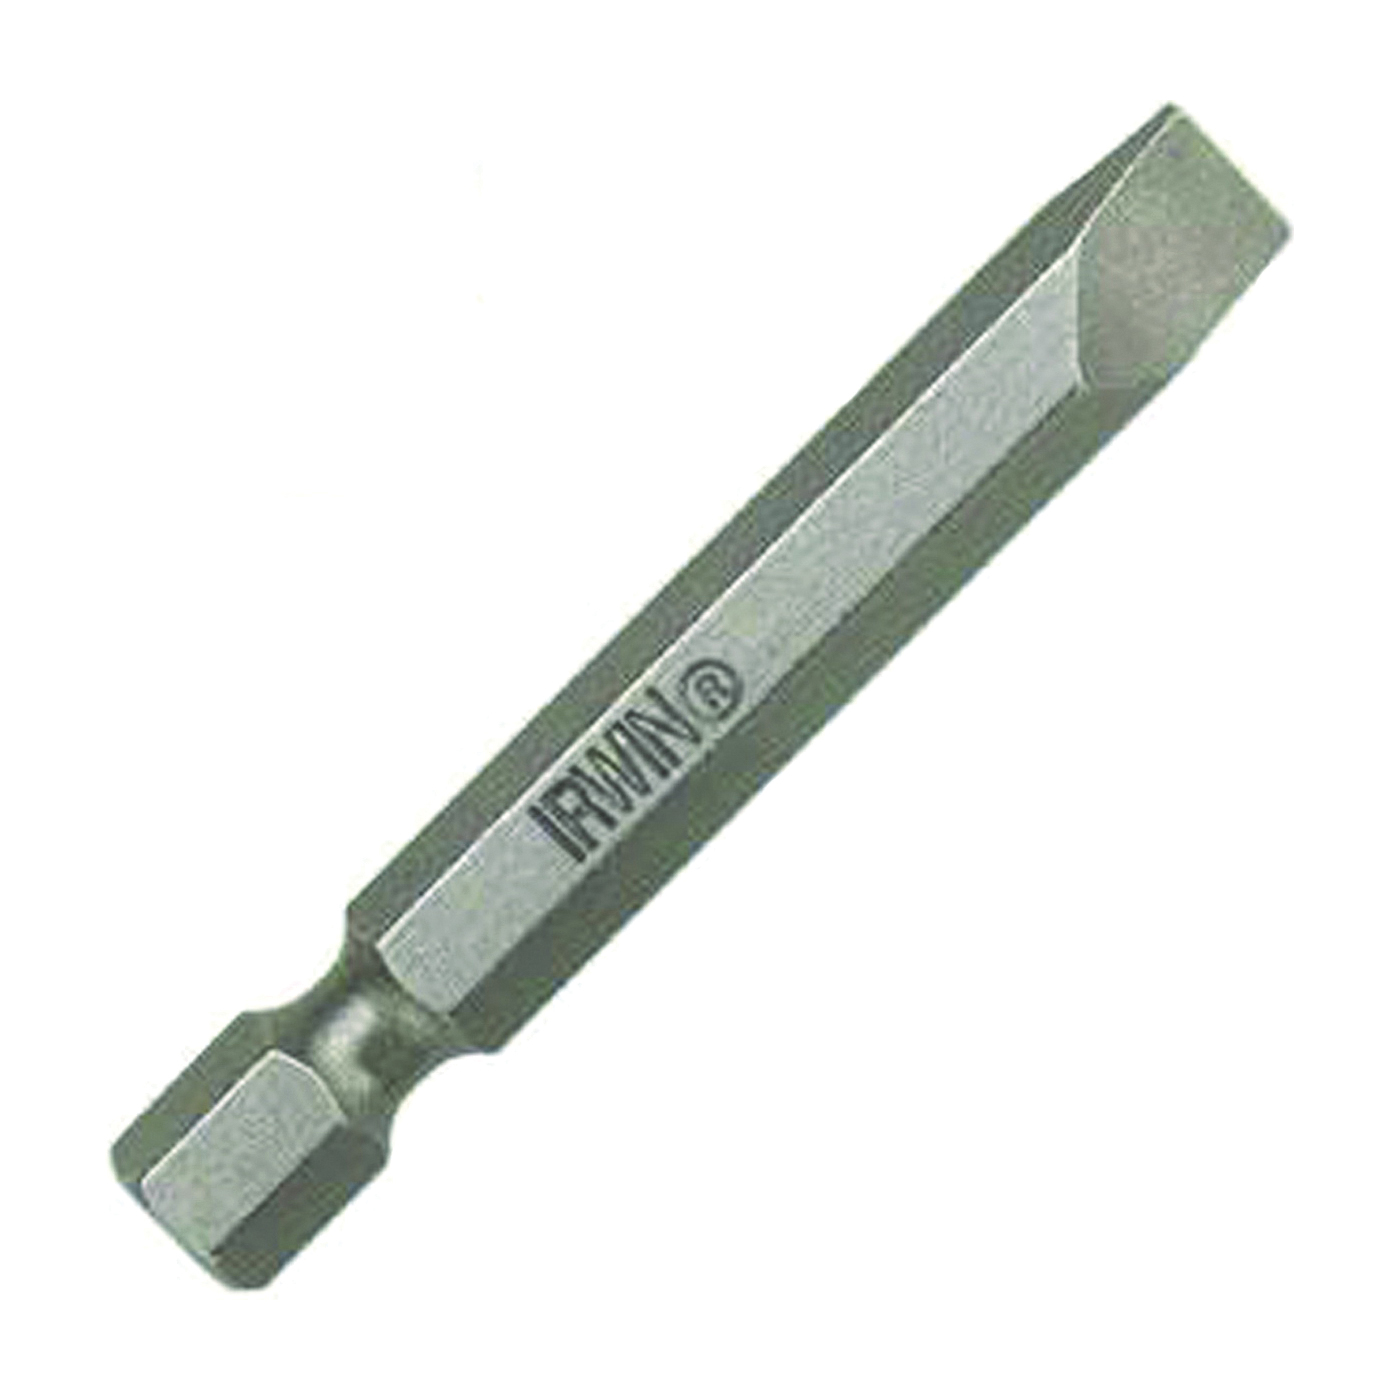 IWAF22SL682 Power Bit, #6 to 8 Drive, Slotted Drive, 1/4 in Shank, Hex Shank, 1-15/16 in L